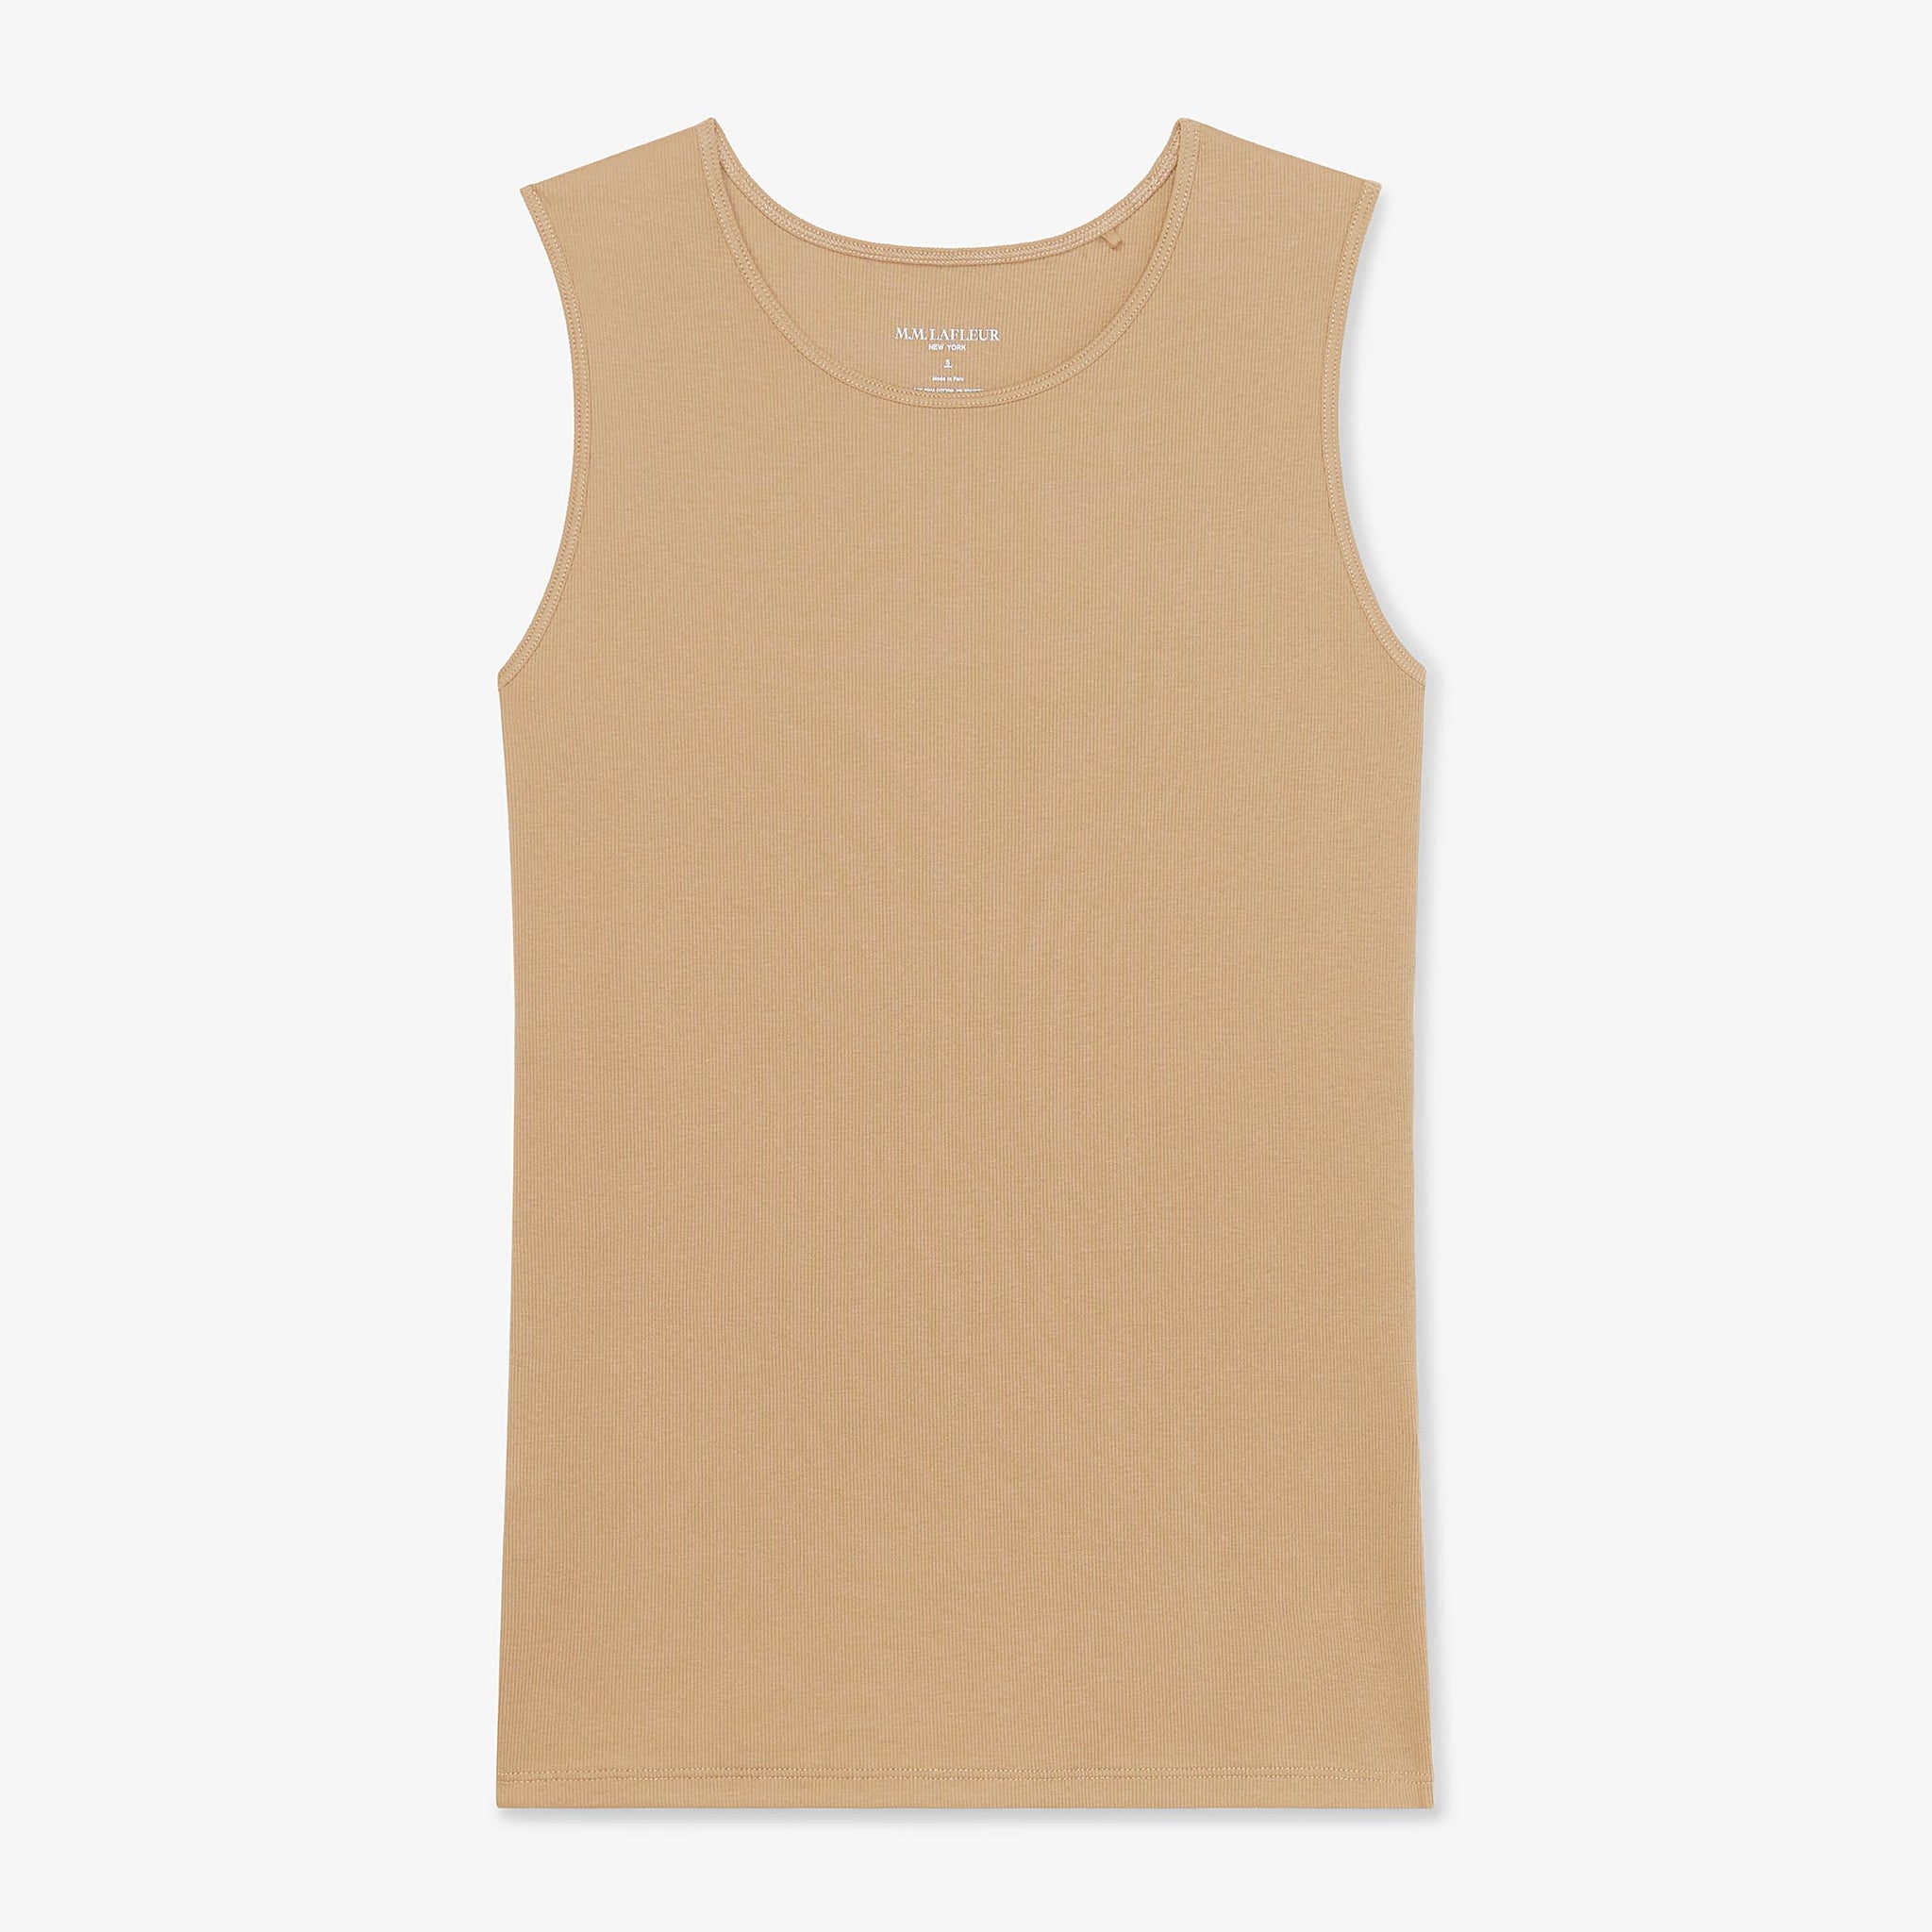 Packshot image of the Paige T-Shirt—Fine Ribbed Cotton in Camel